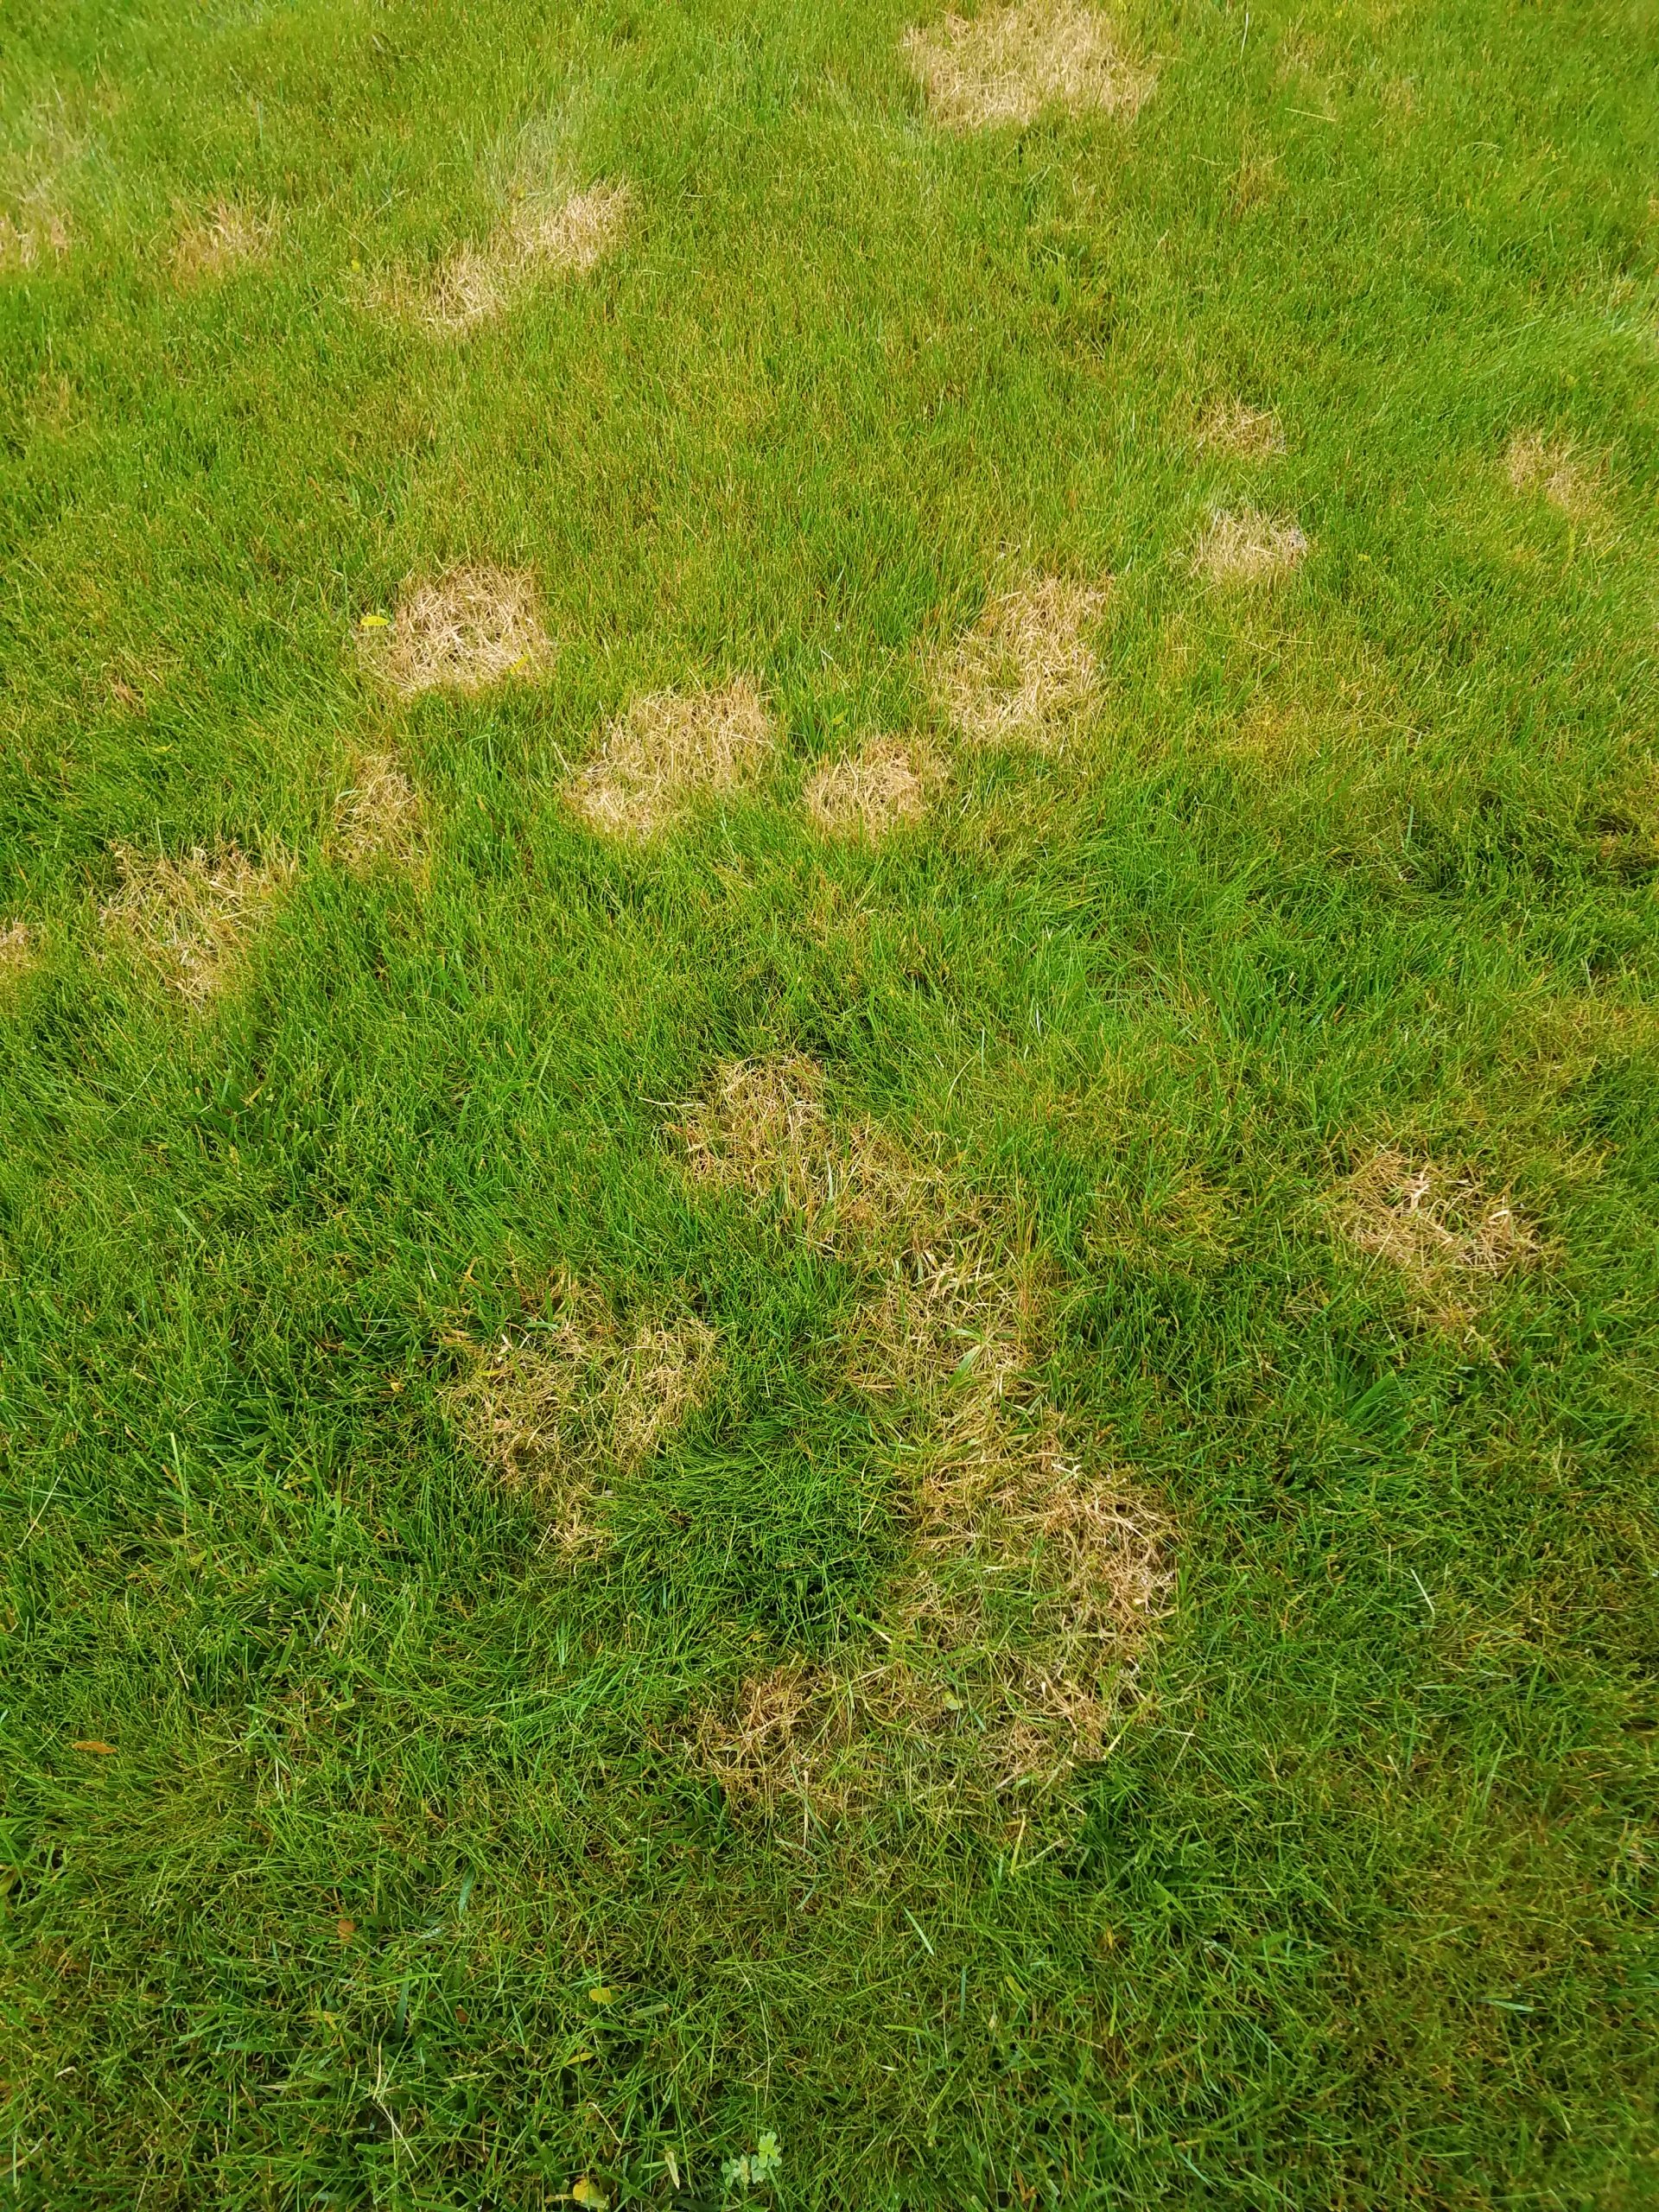 Excess of Fungi Can Cause A Change of Grass Color